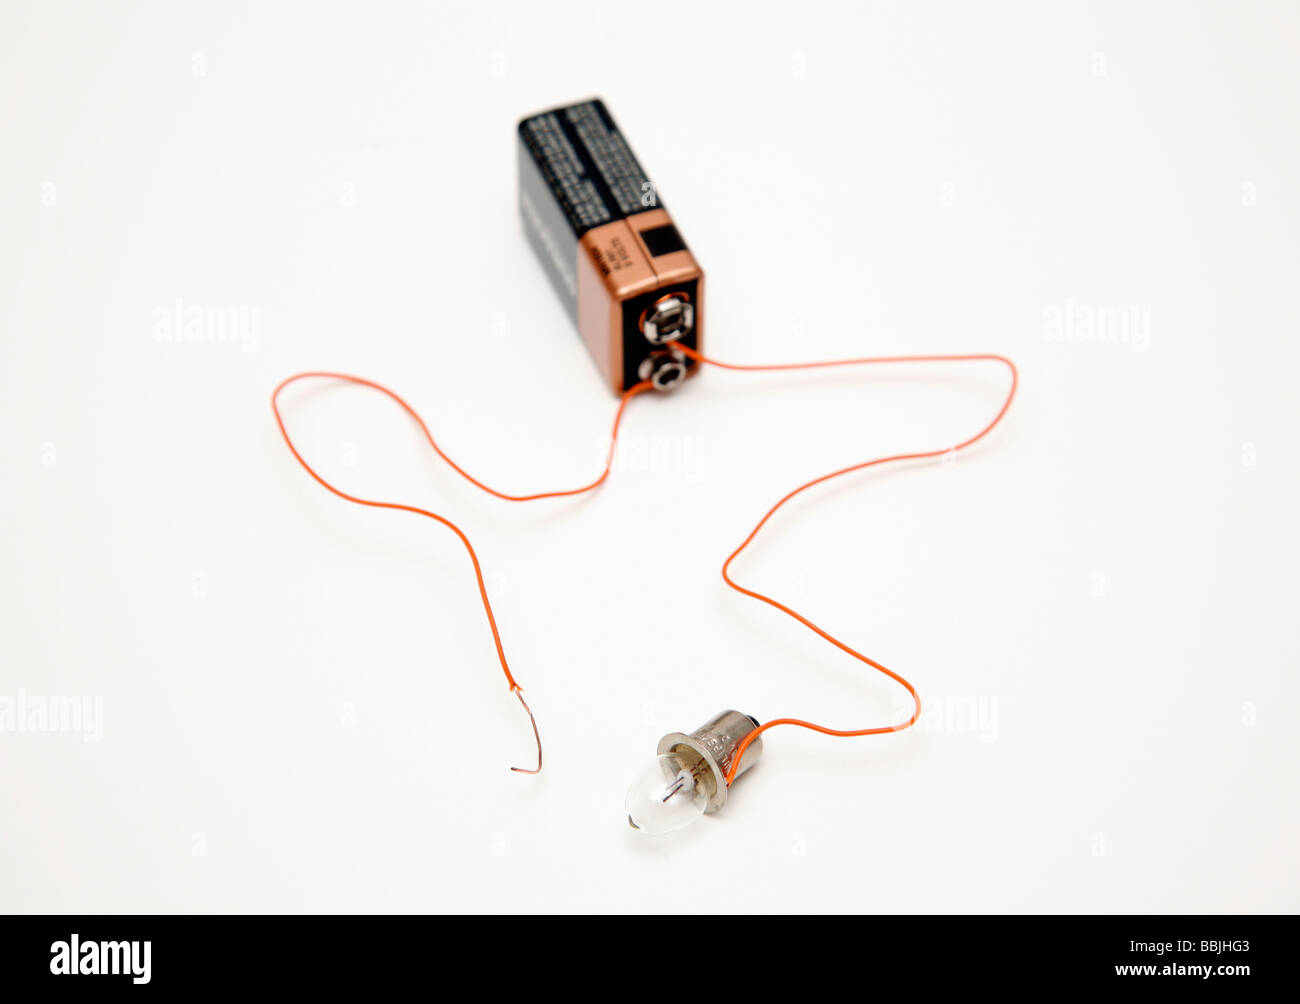 battery and bulb circuit with one wire not attached to bulb Stock Photo